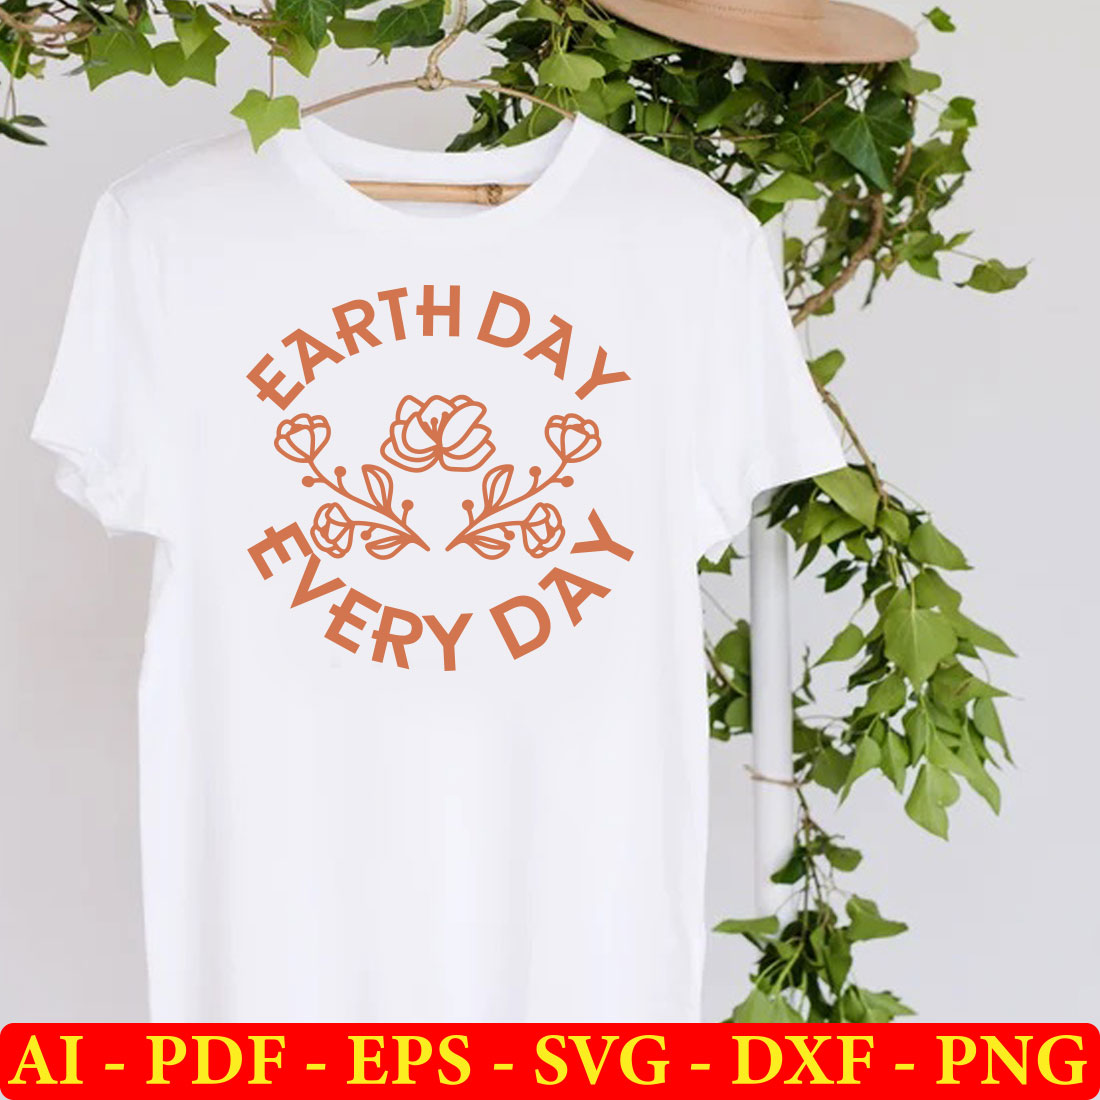 T - shirt that says earth day every day.